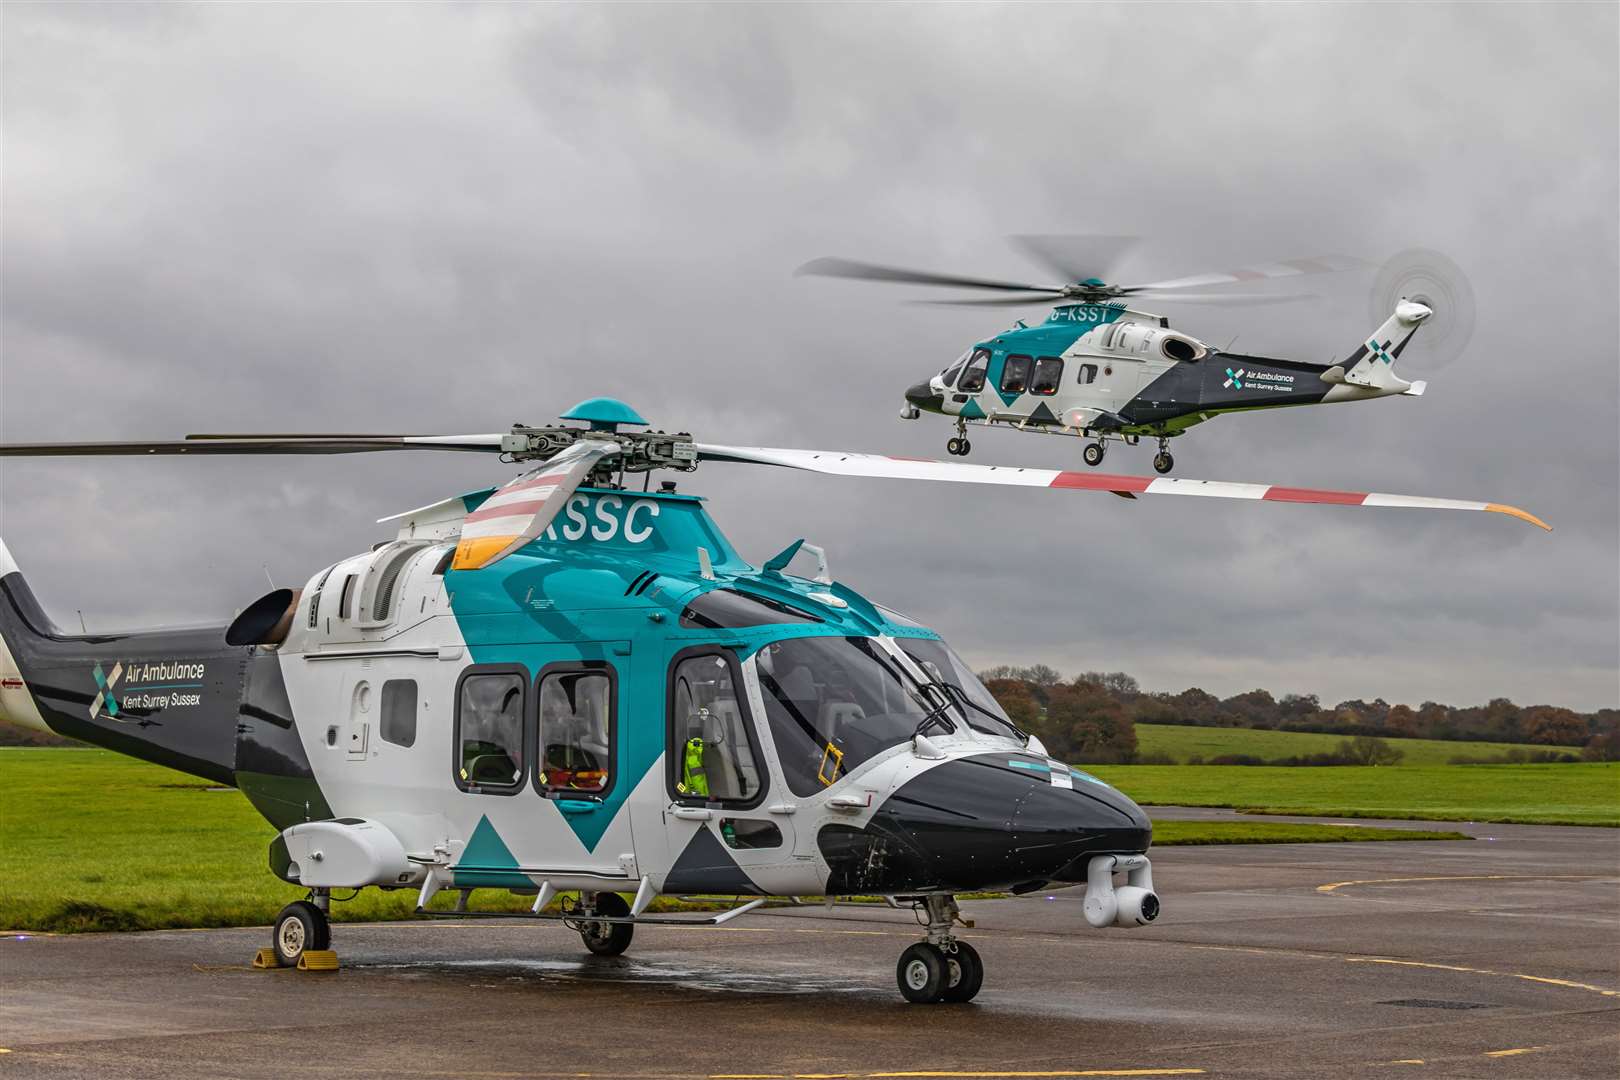 Air Ambulance Kent Surrey Sussex helicopters